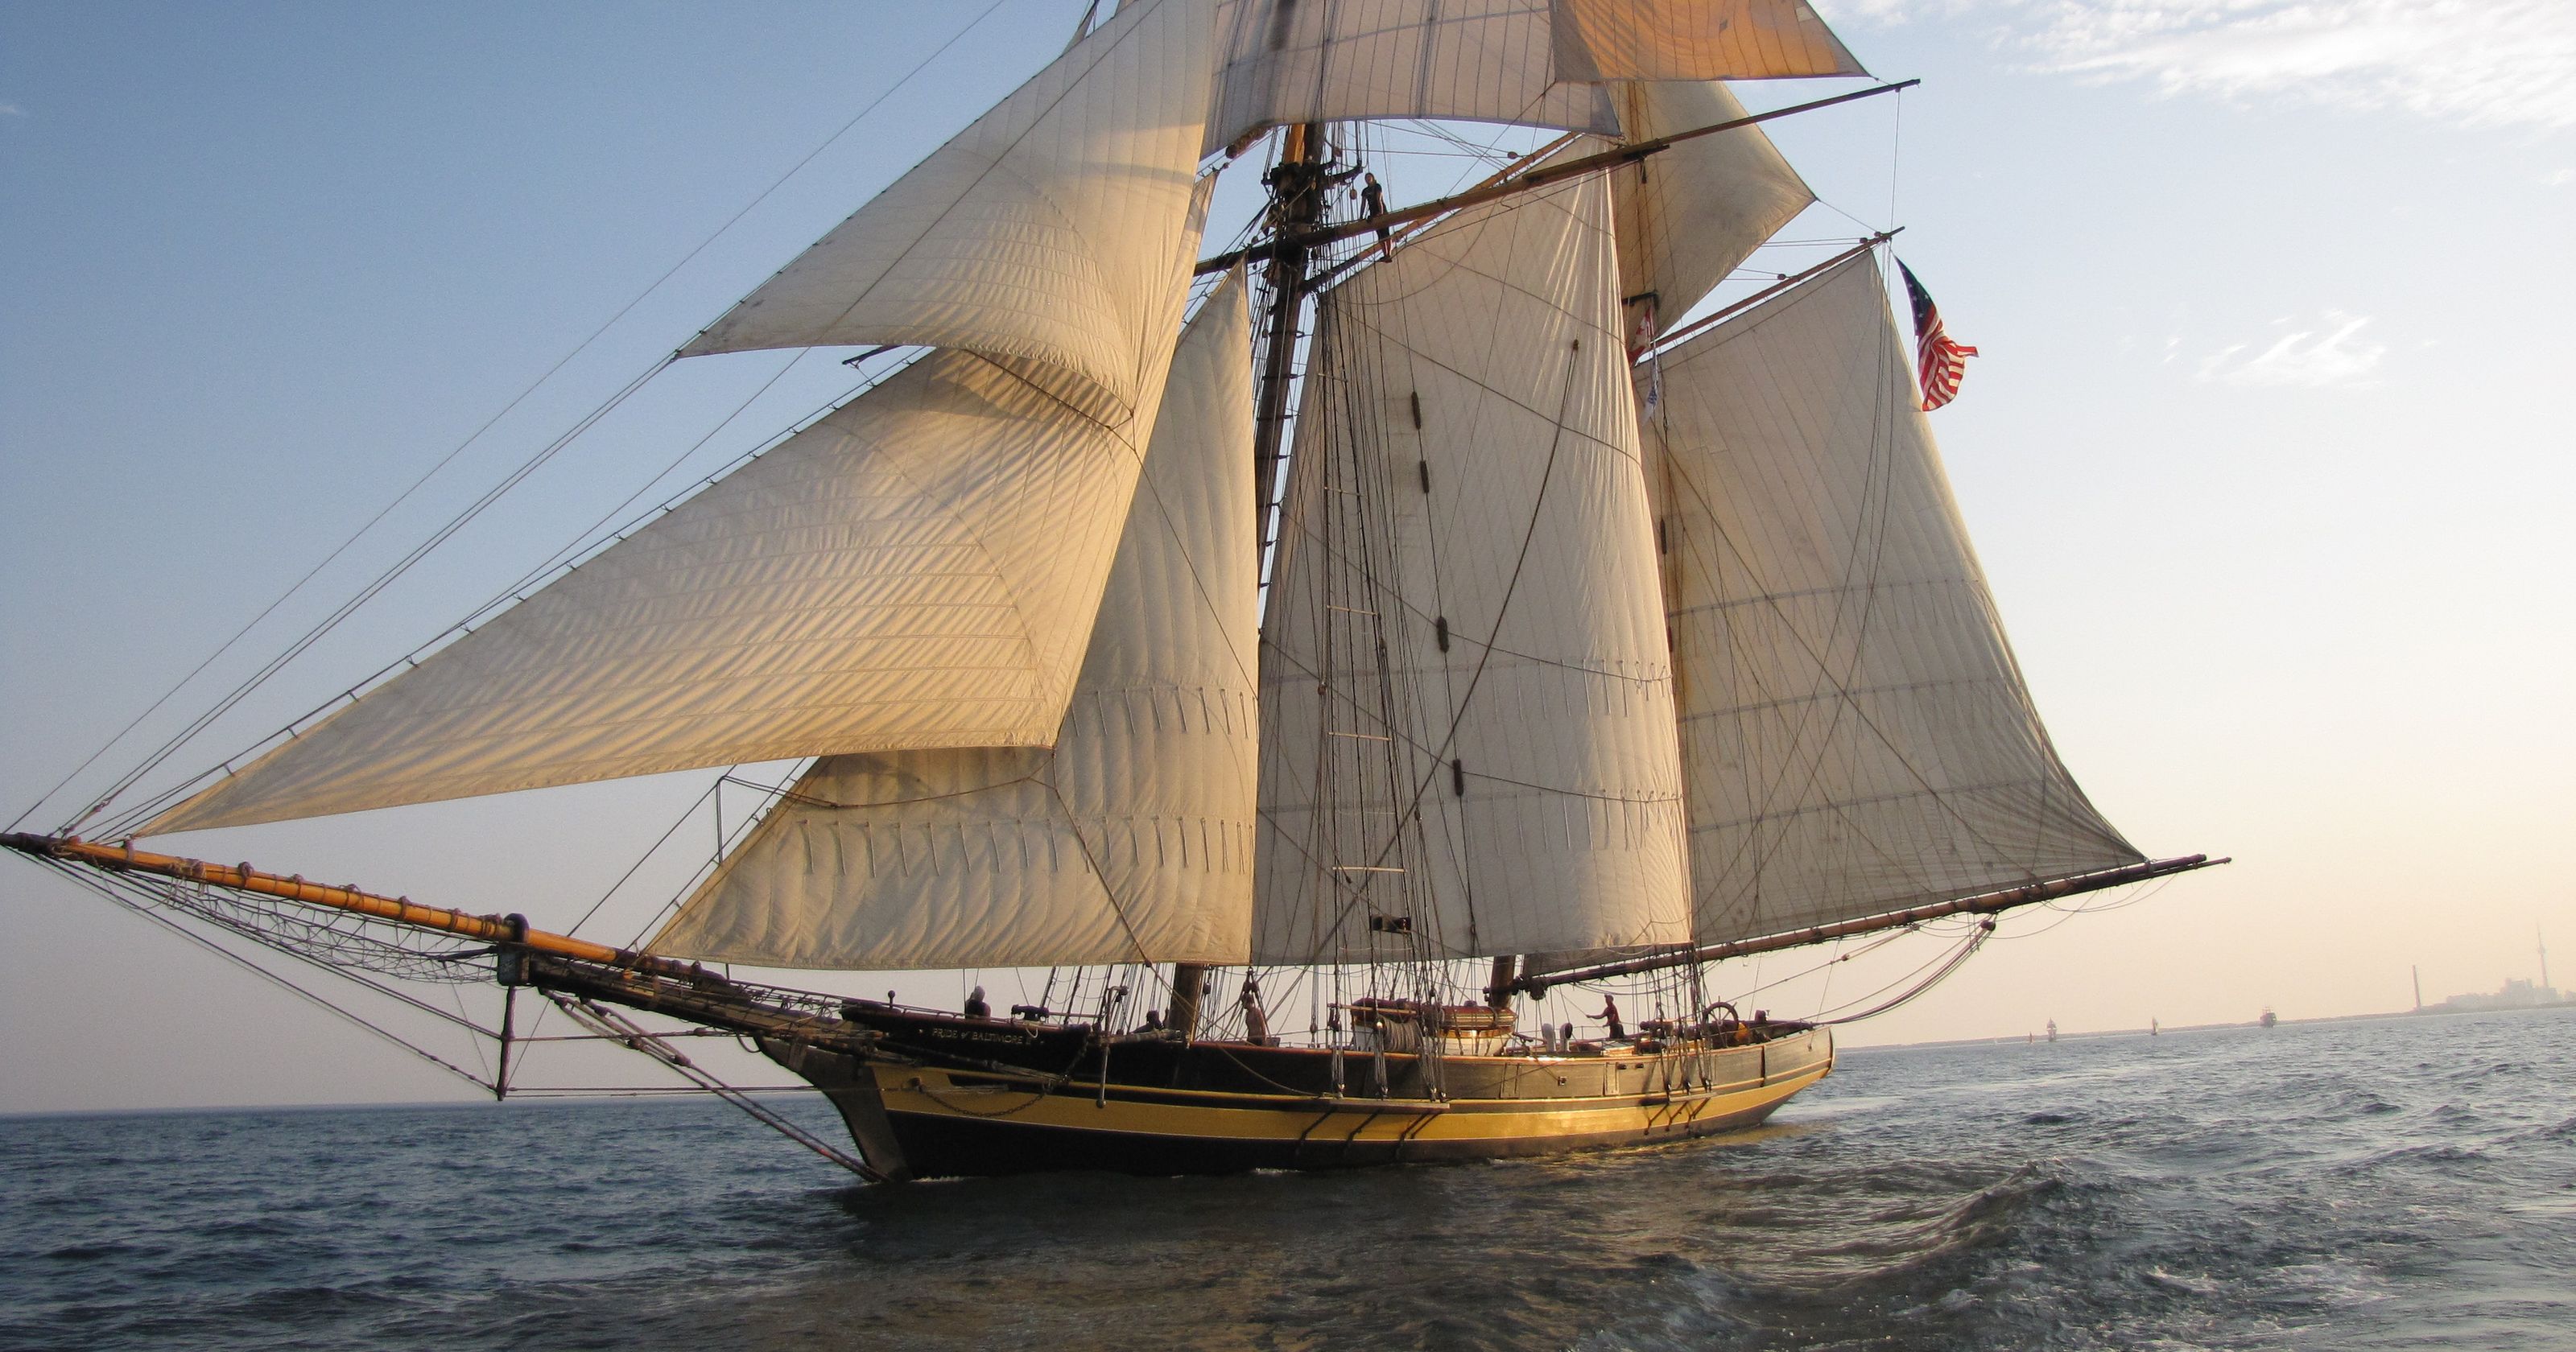 Presale tickets now available for Tall Ships Challenge